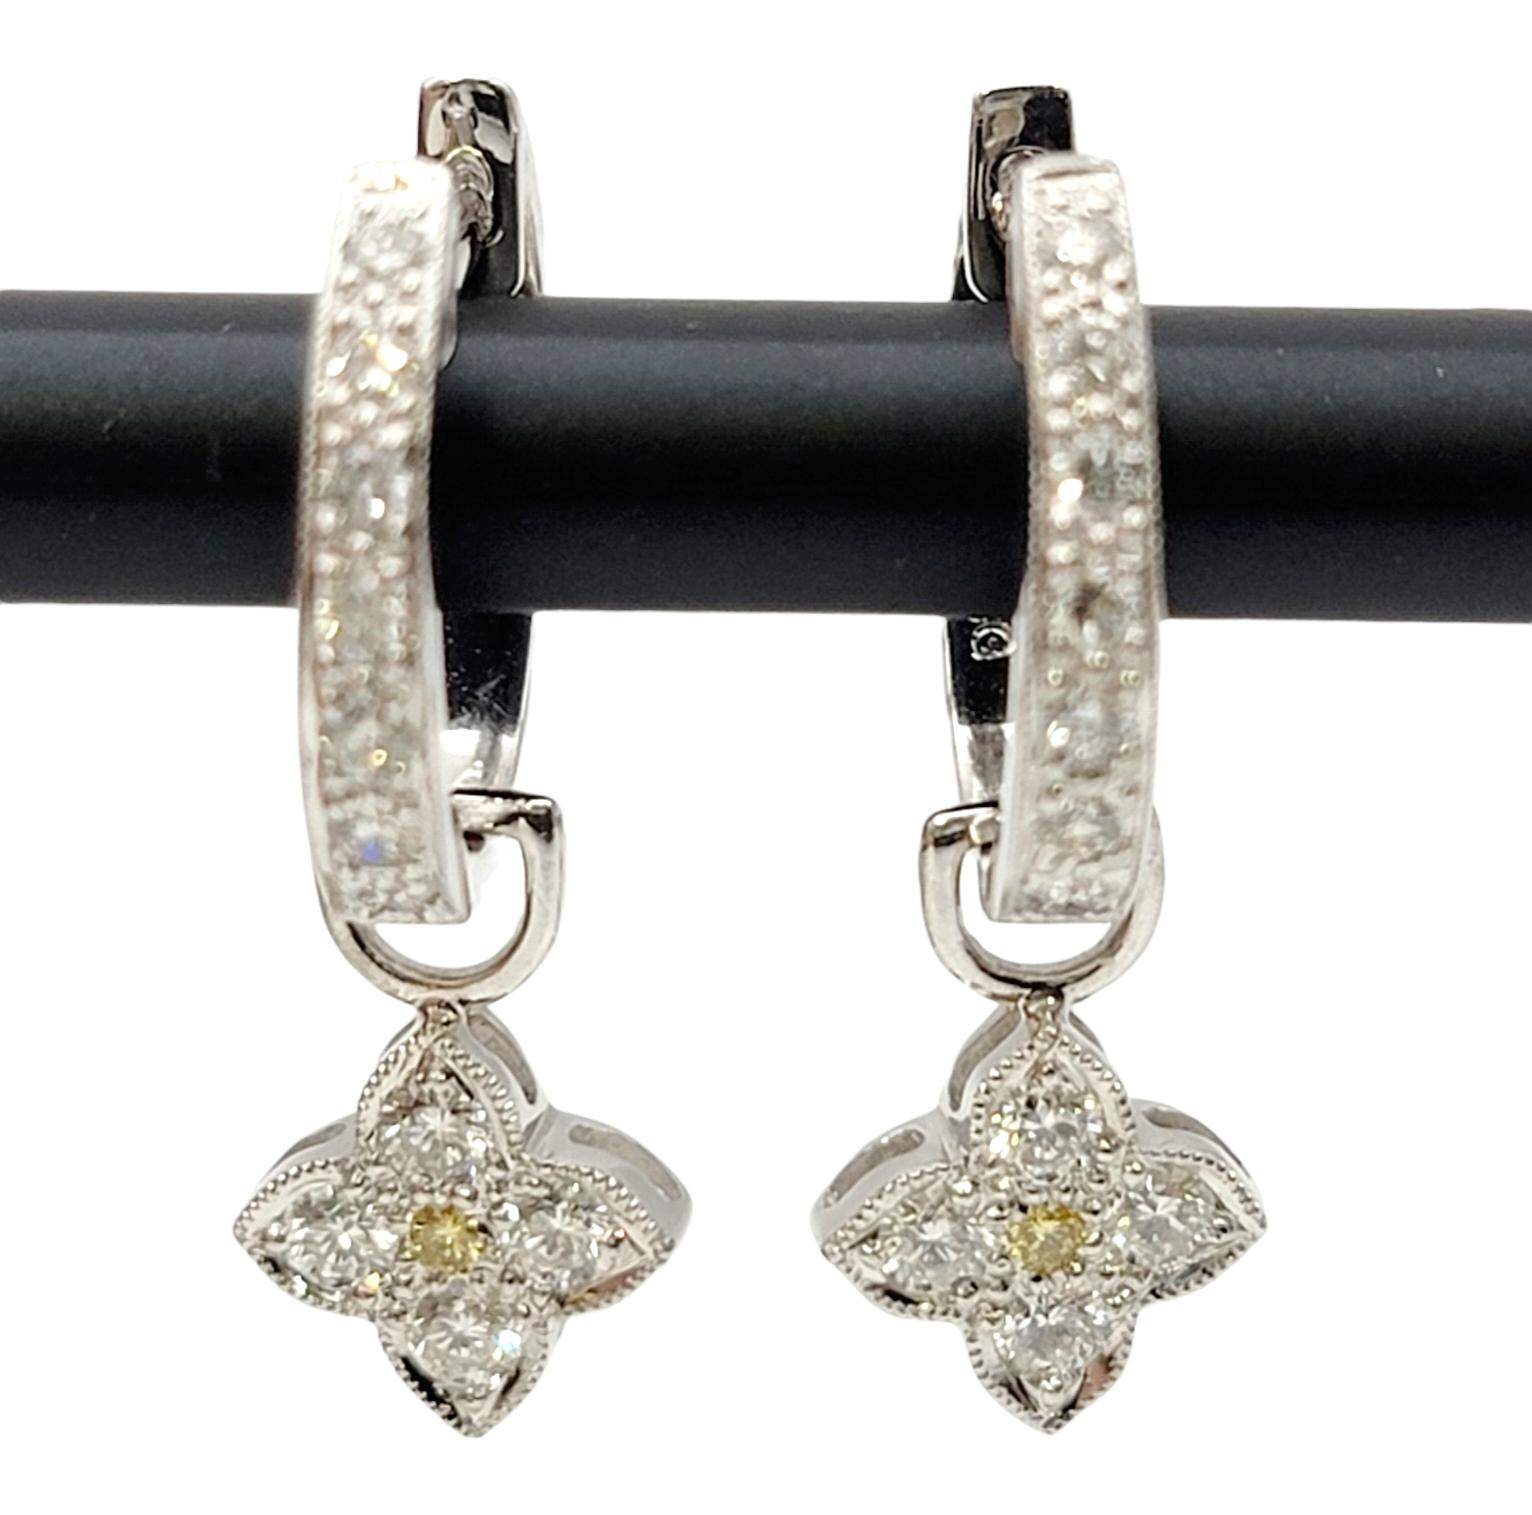  Round Diamond Huggie Hoop Earrings with Yellow and White Diamond Dangles For Sale 4